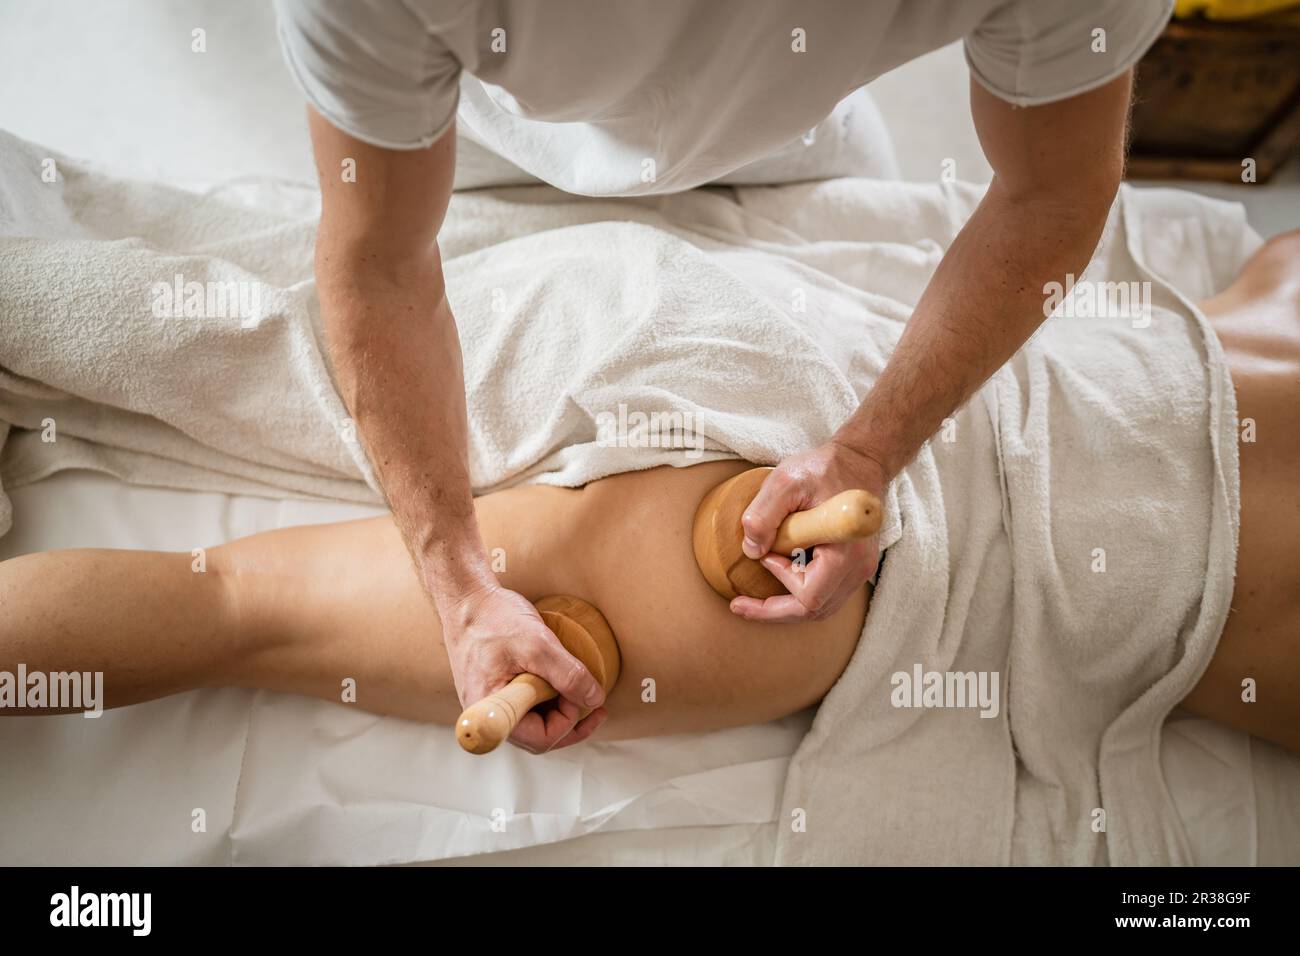 https://c8.alamy.com/comp/2R38G9F/unknown-caucasian-woman-having-madero-therapy-massage-anti-cellulite-treatment-by-professional-therapist-holding-wooden-tools-in-hands-in-studio-or-sa-2R38G9F.jpg